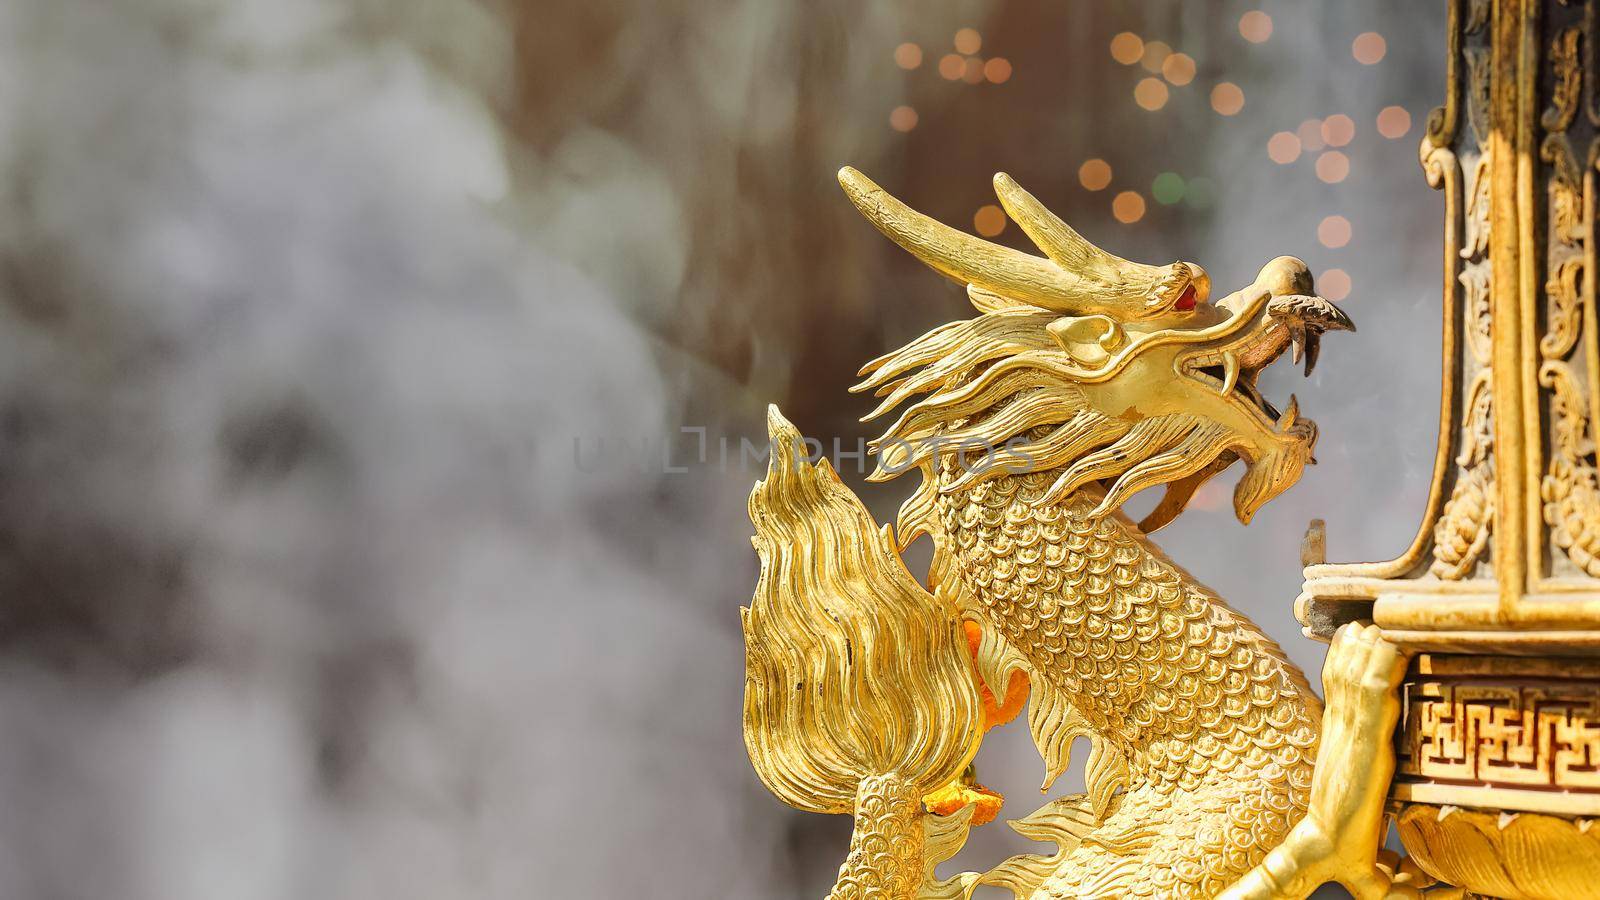 Golden Dragon Sculpture in shrine by toa55